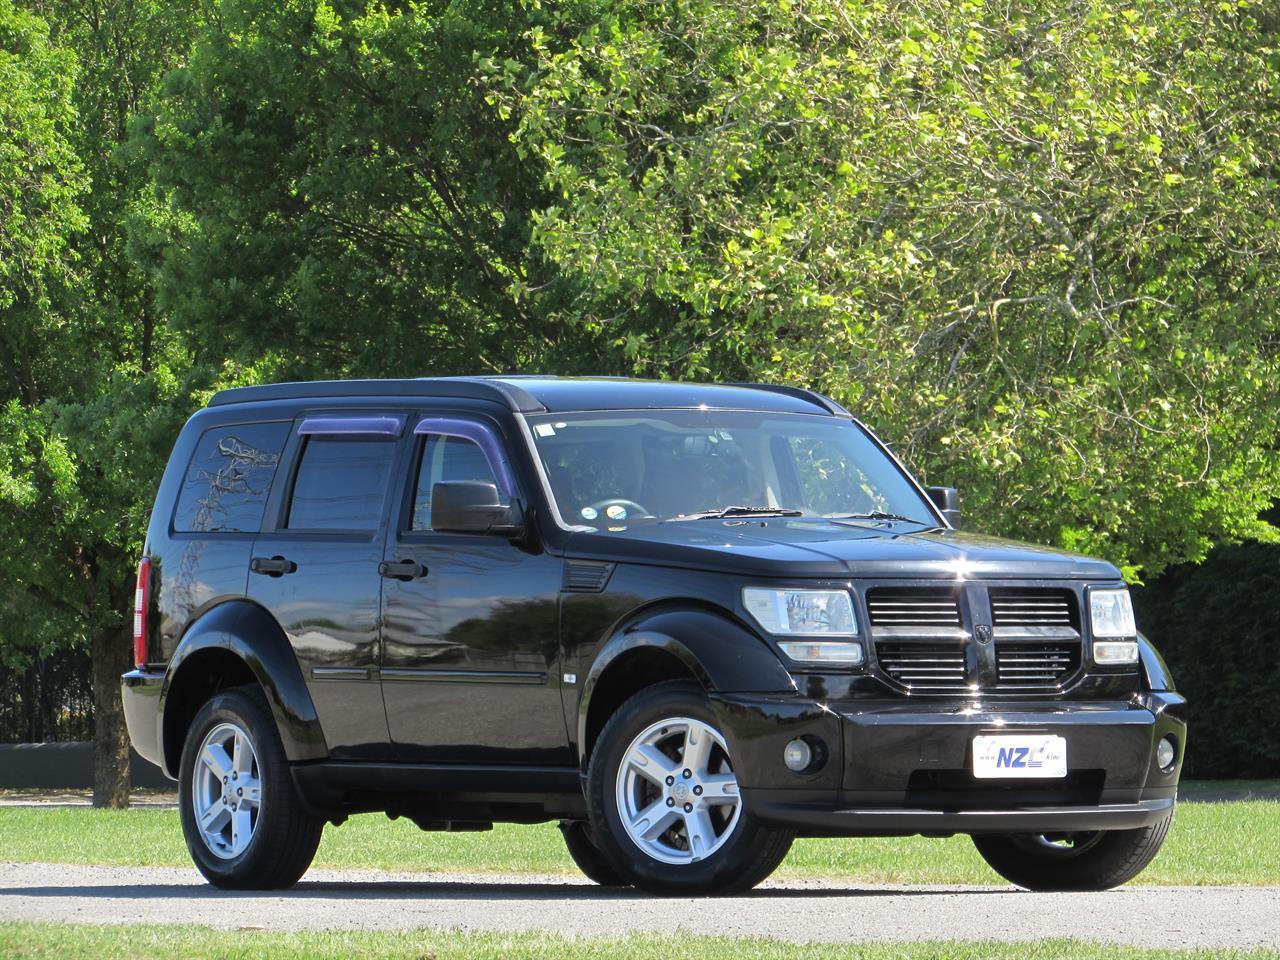 NZC best hot price for 2007 Dodge Nitro in Christchurch